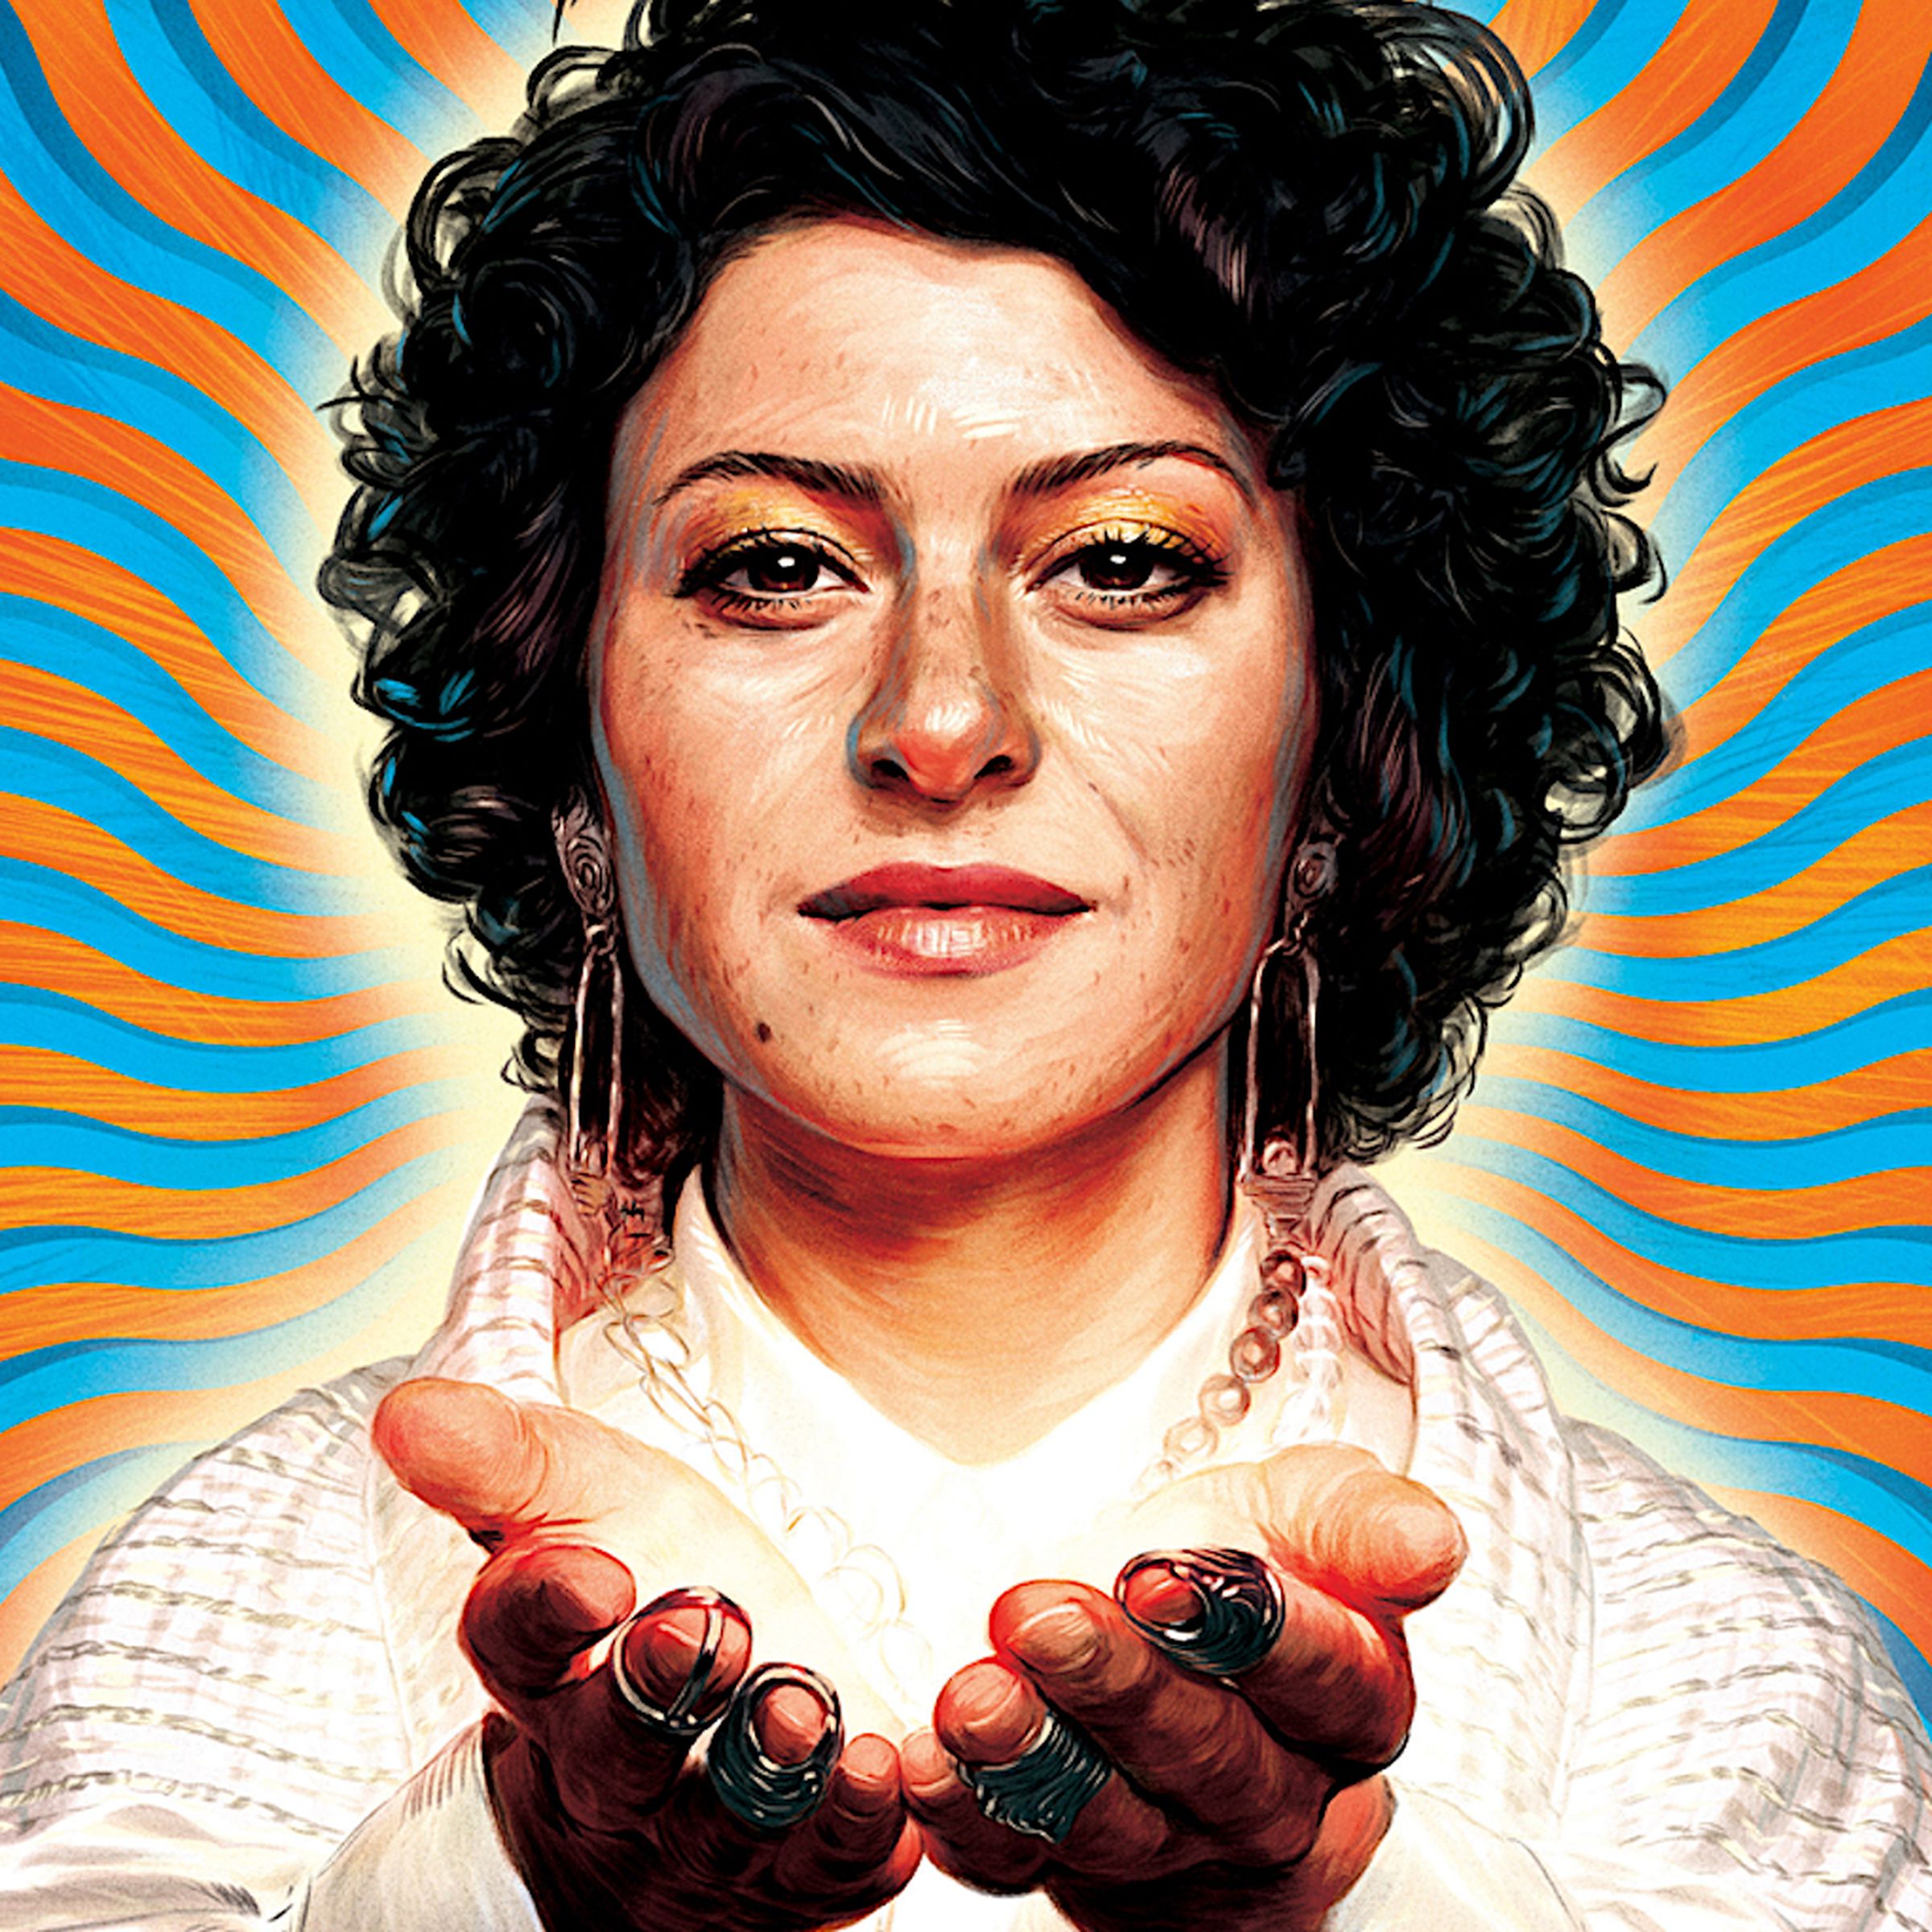 Key art for Search Party’s featuring Alia Shawkat as Dory Sief.